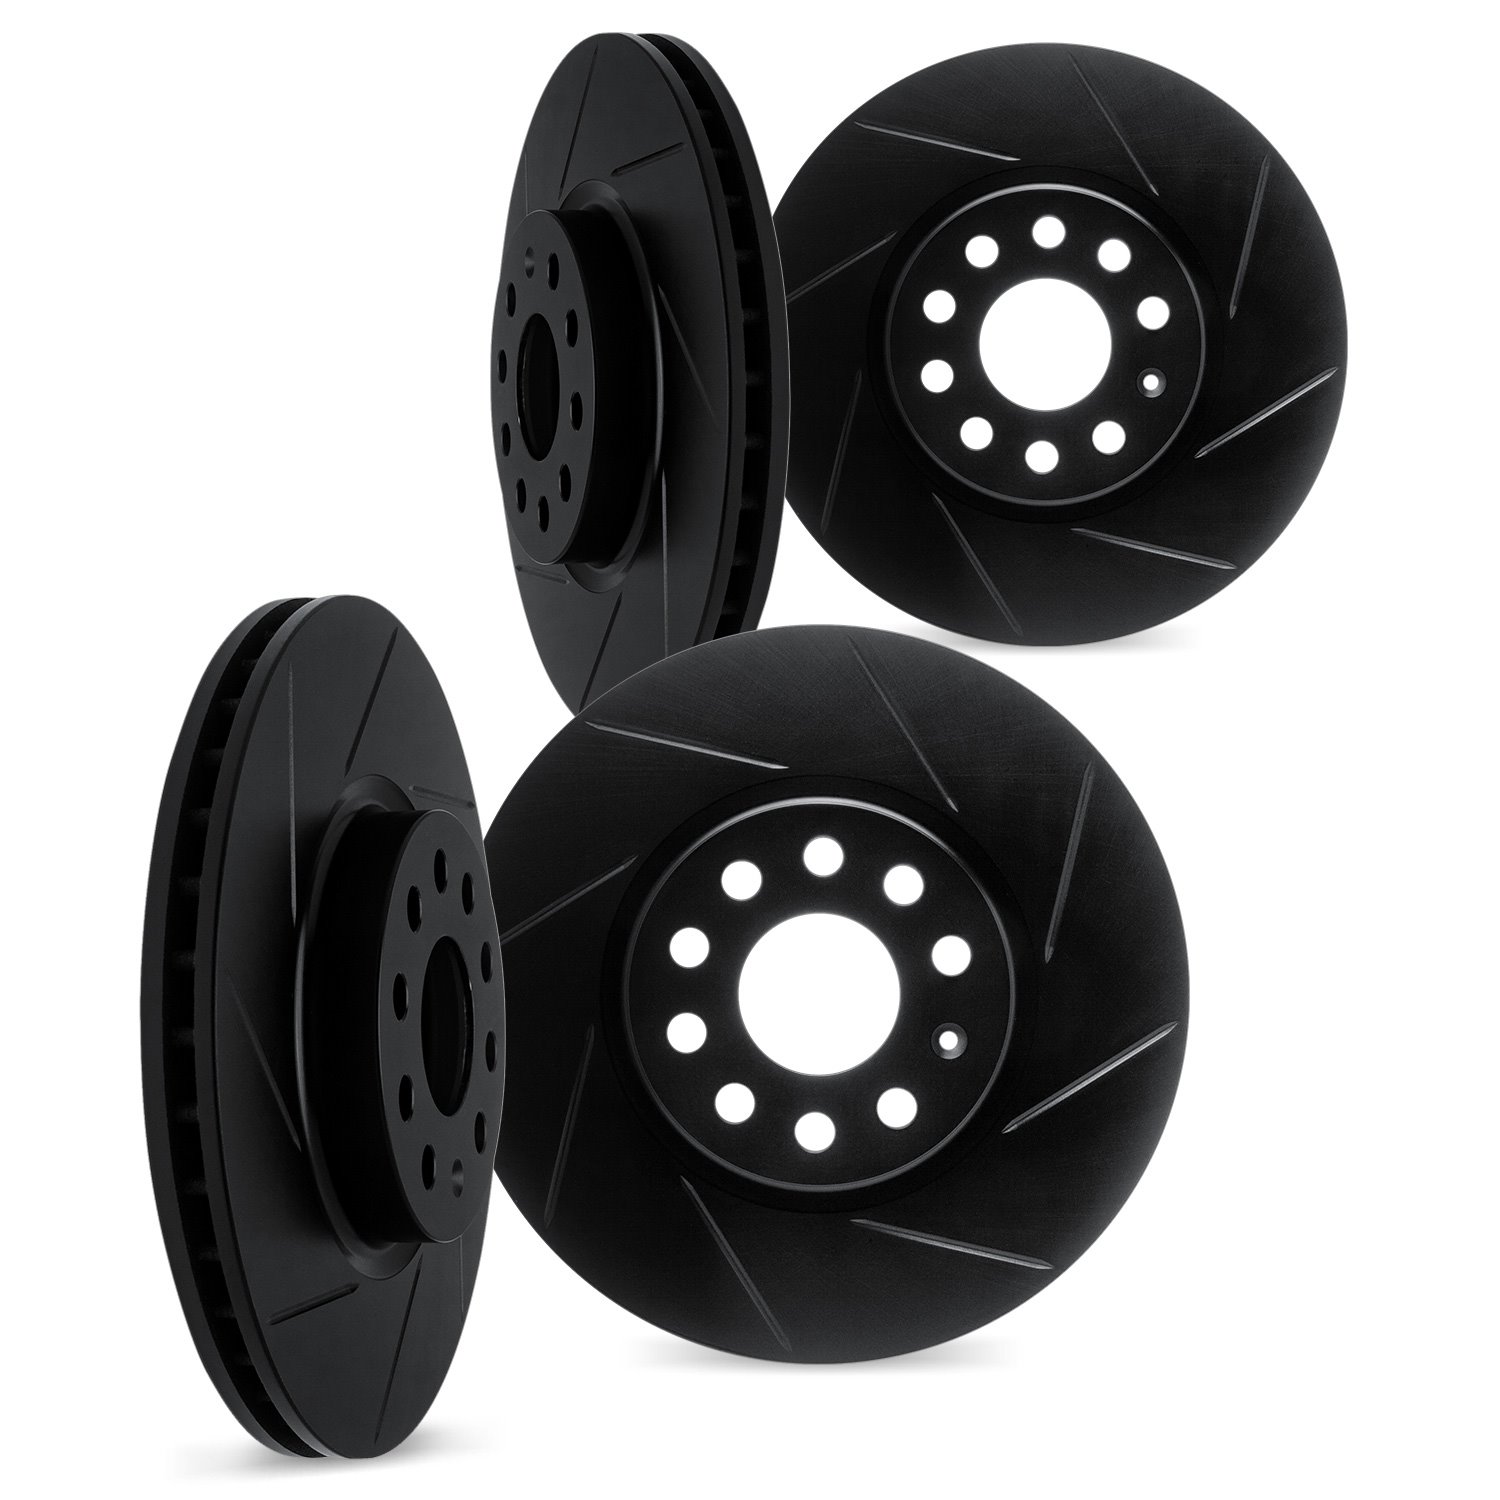 3004-01009 Slotted Brake Rotors [Black], 2009-2017 Suzuki, Position: Front and Rear